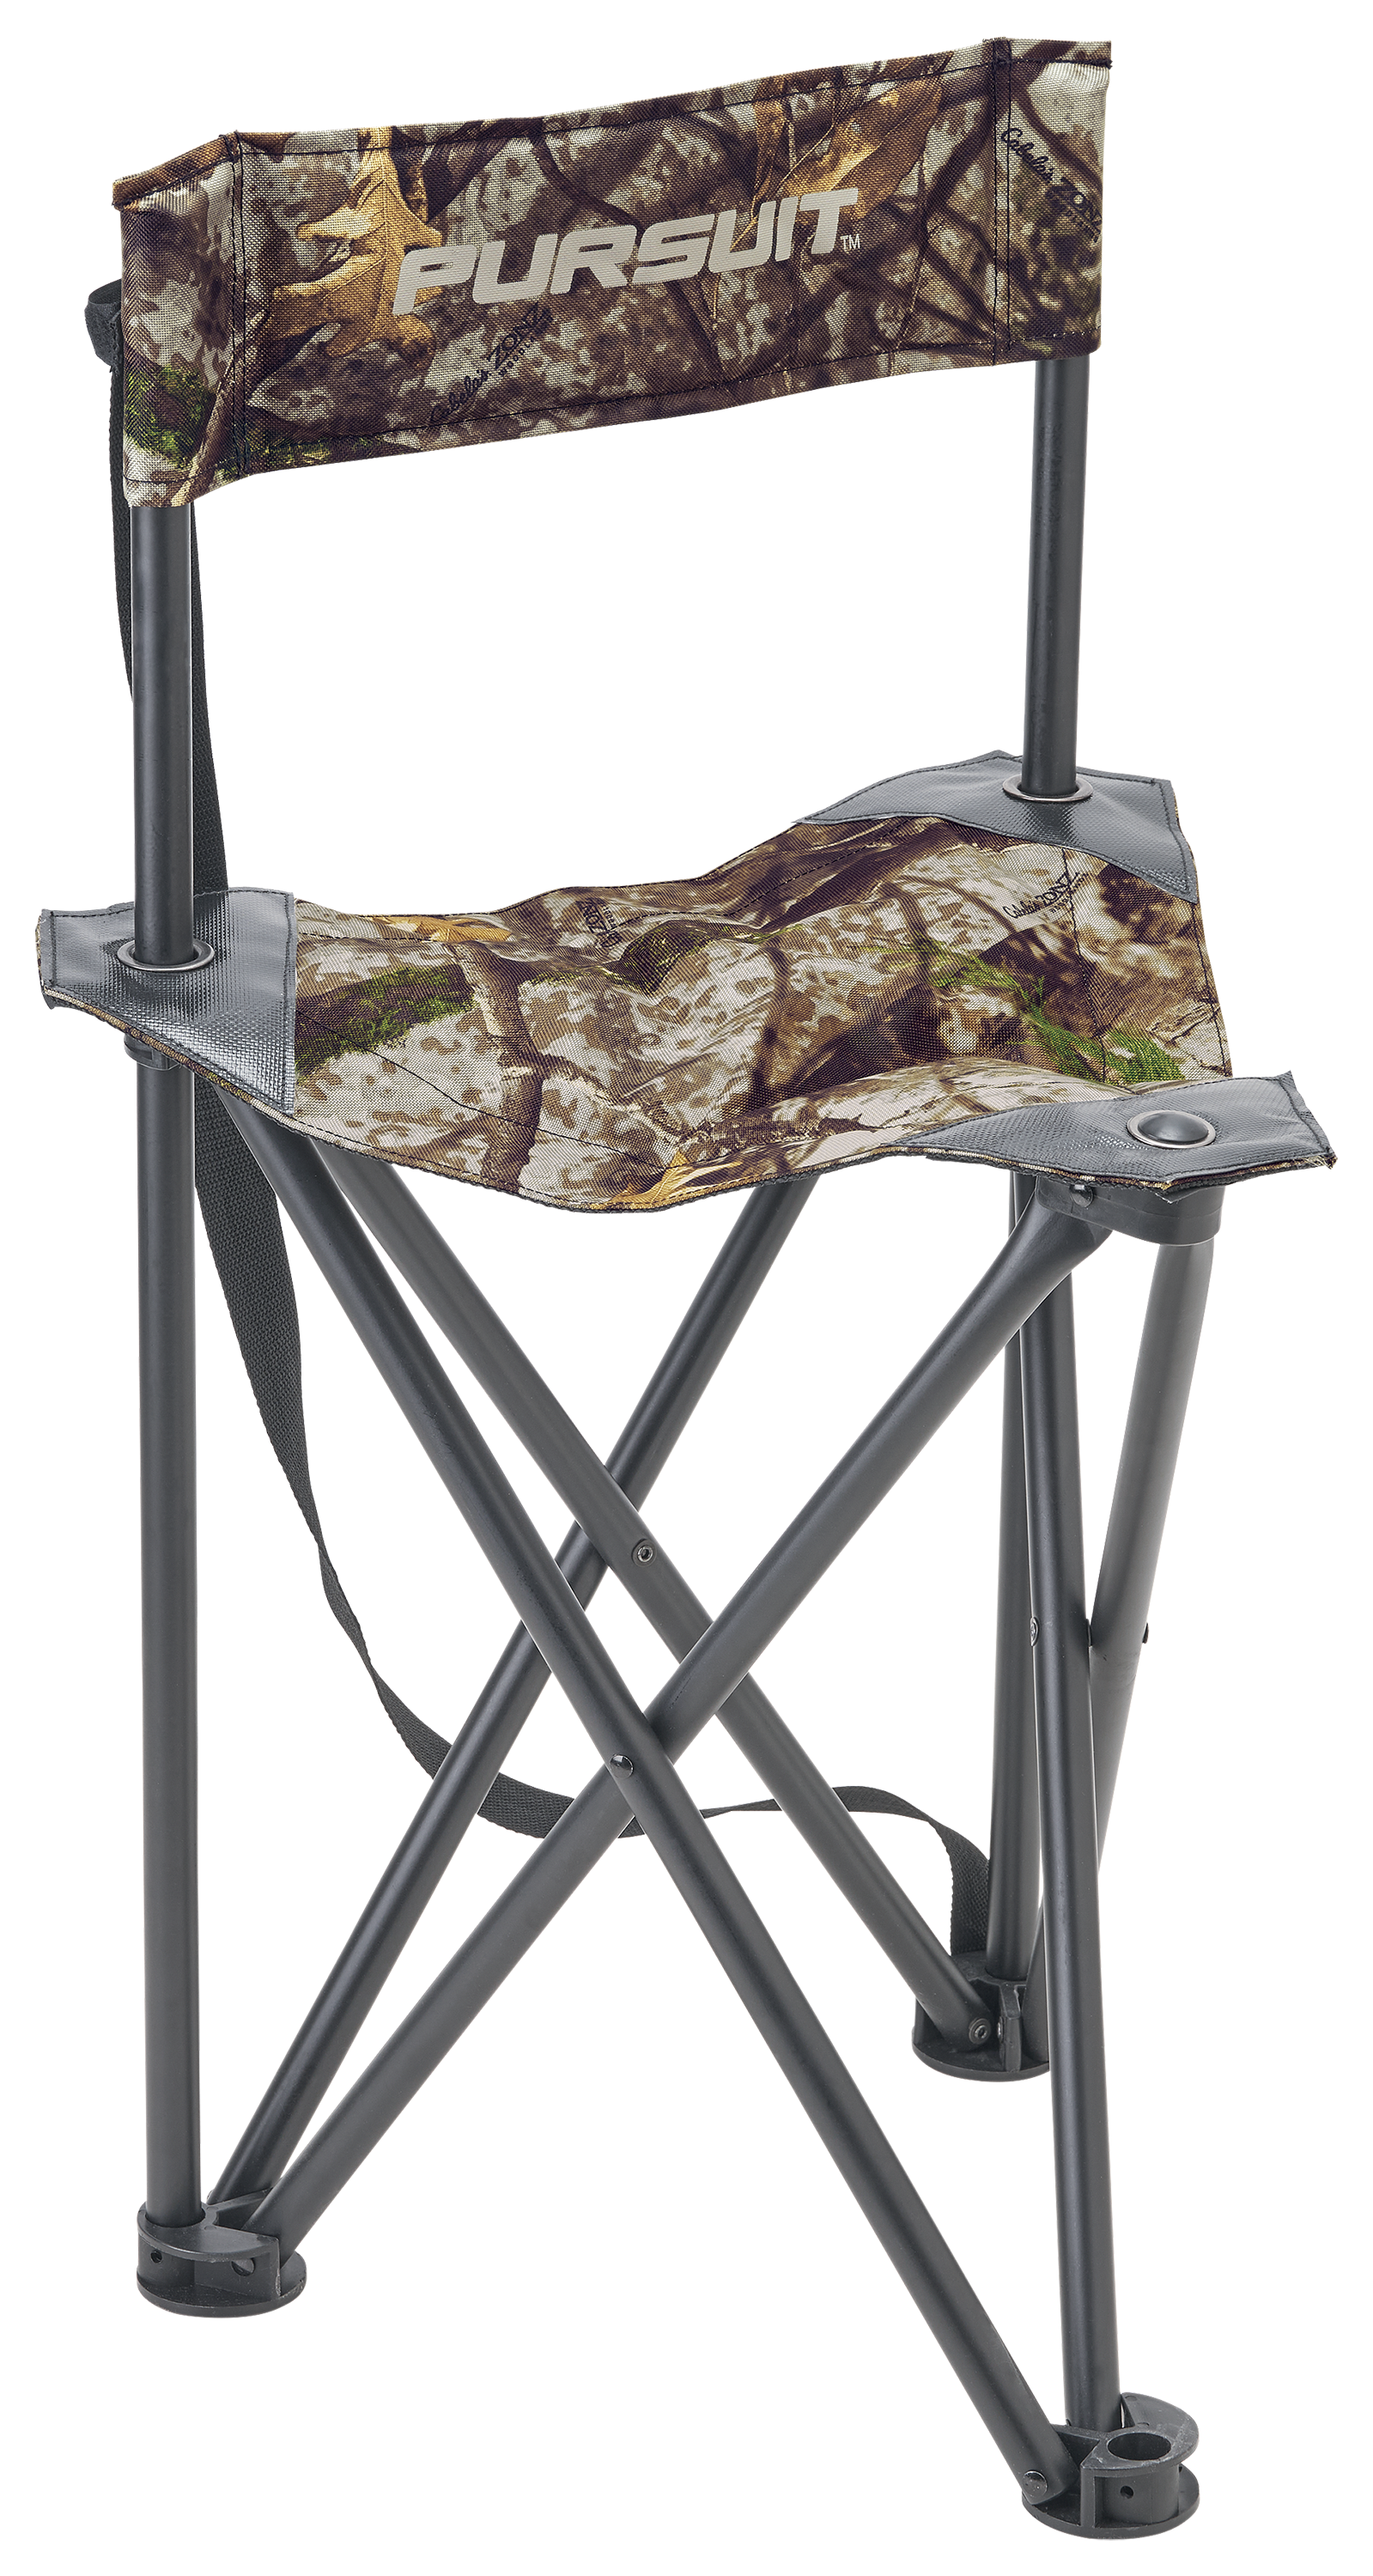 Pursuit Zonz Woodlands Camo Tripod Collapsible Hunting Stool